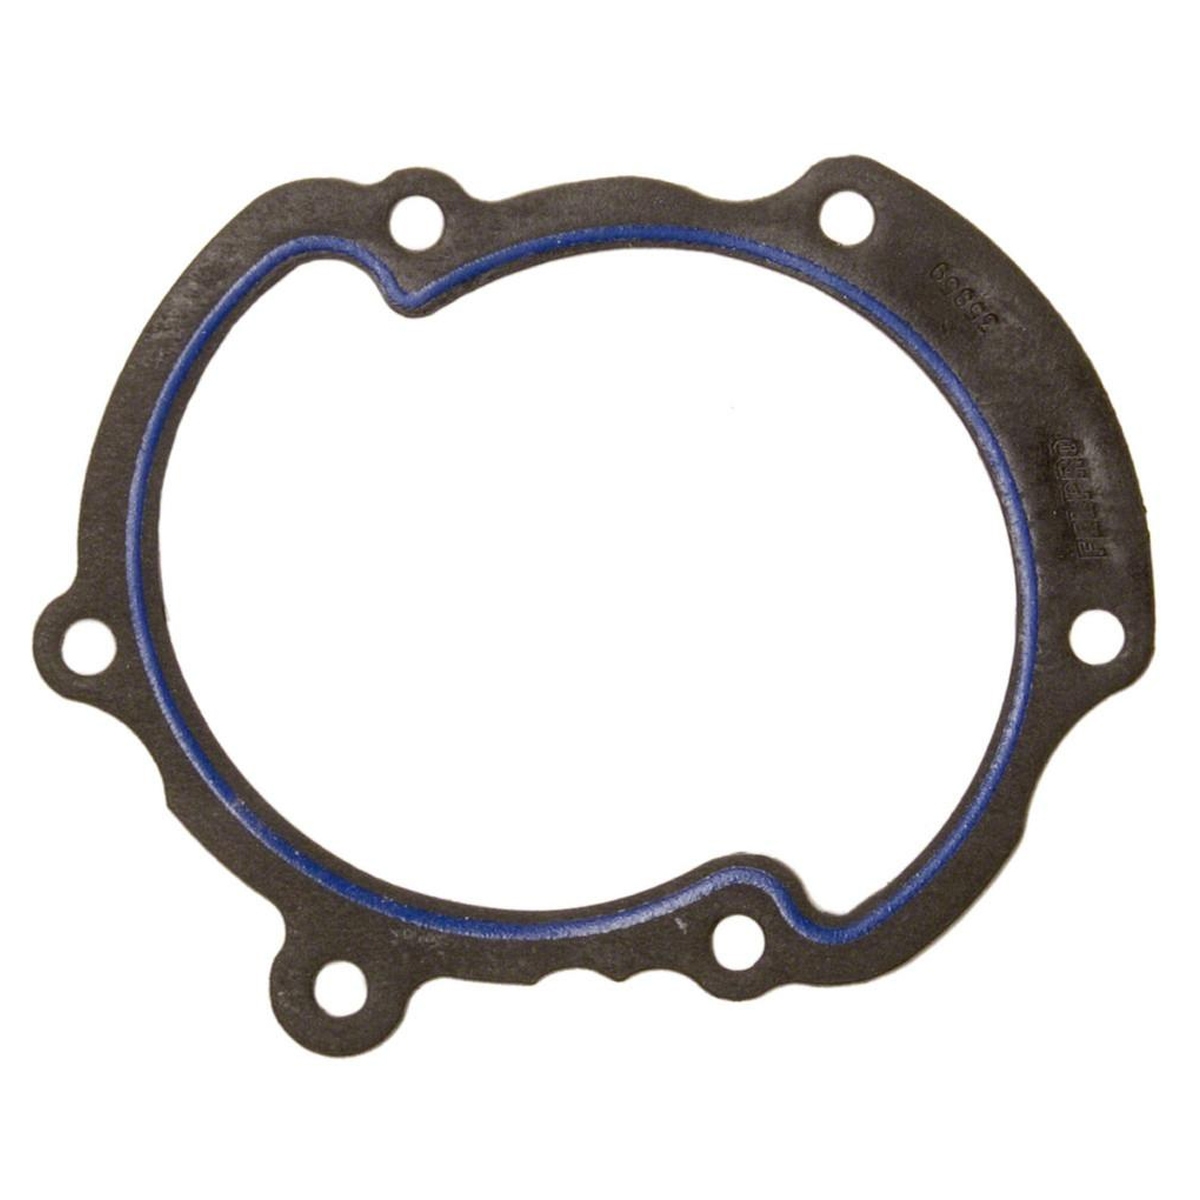 VAUXHALL AND OPEL FRONTERA Water Pump Gasket